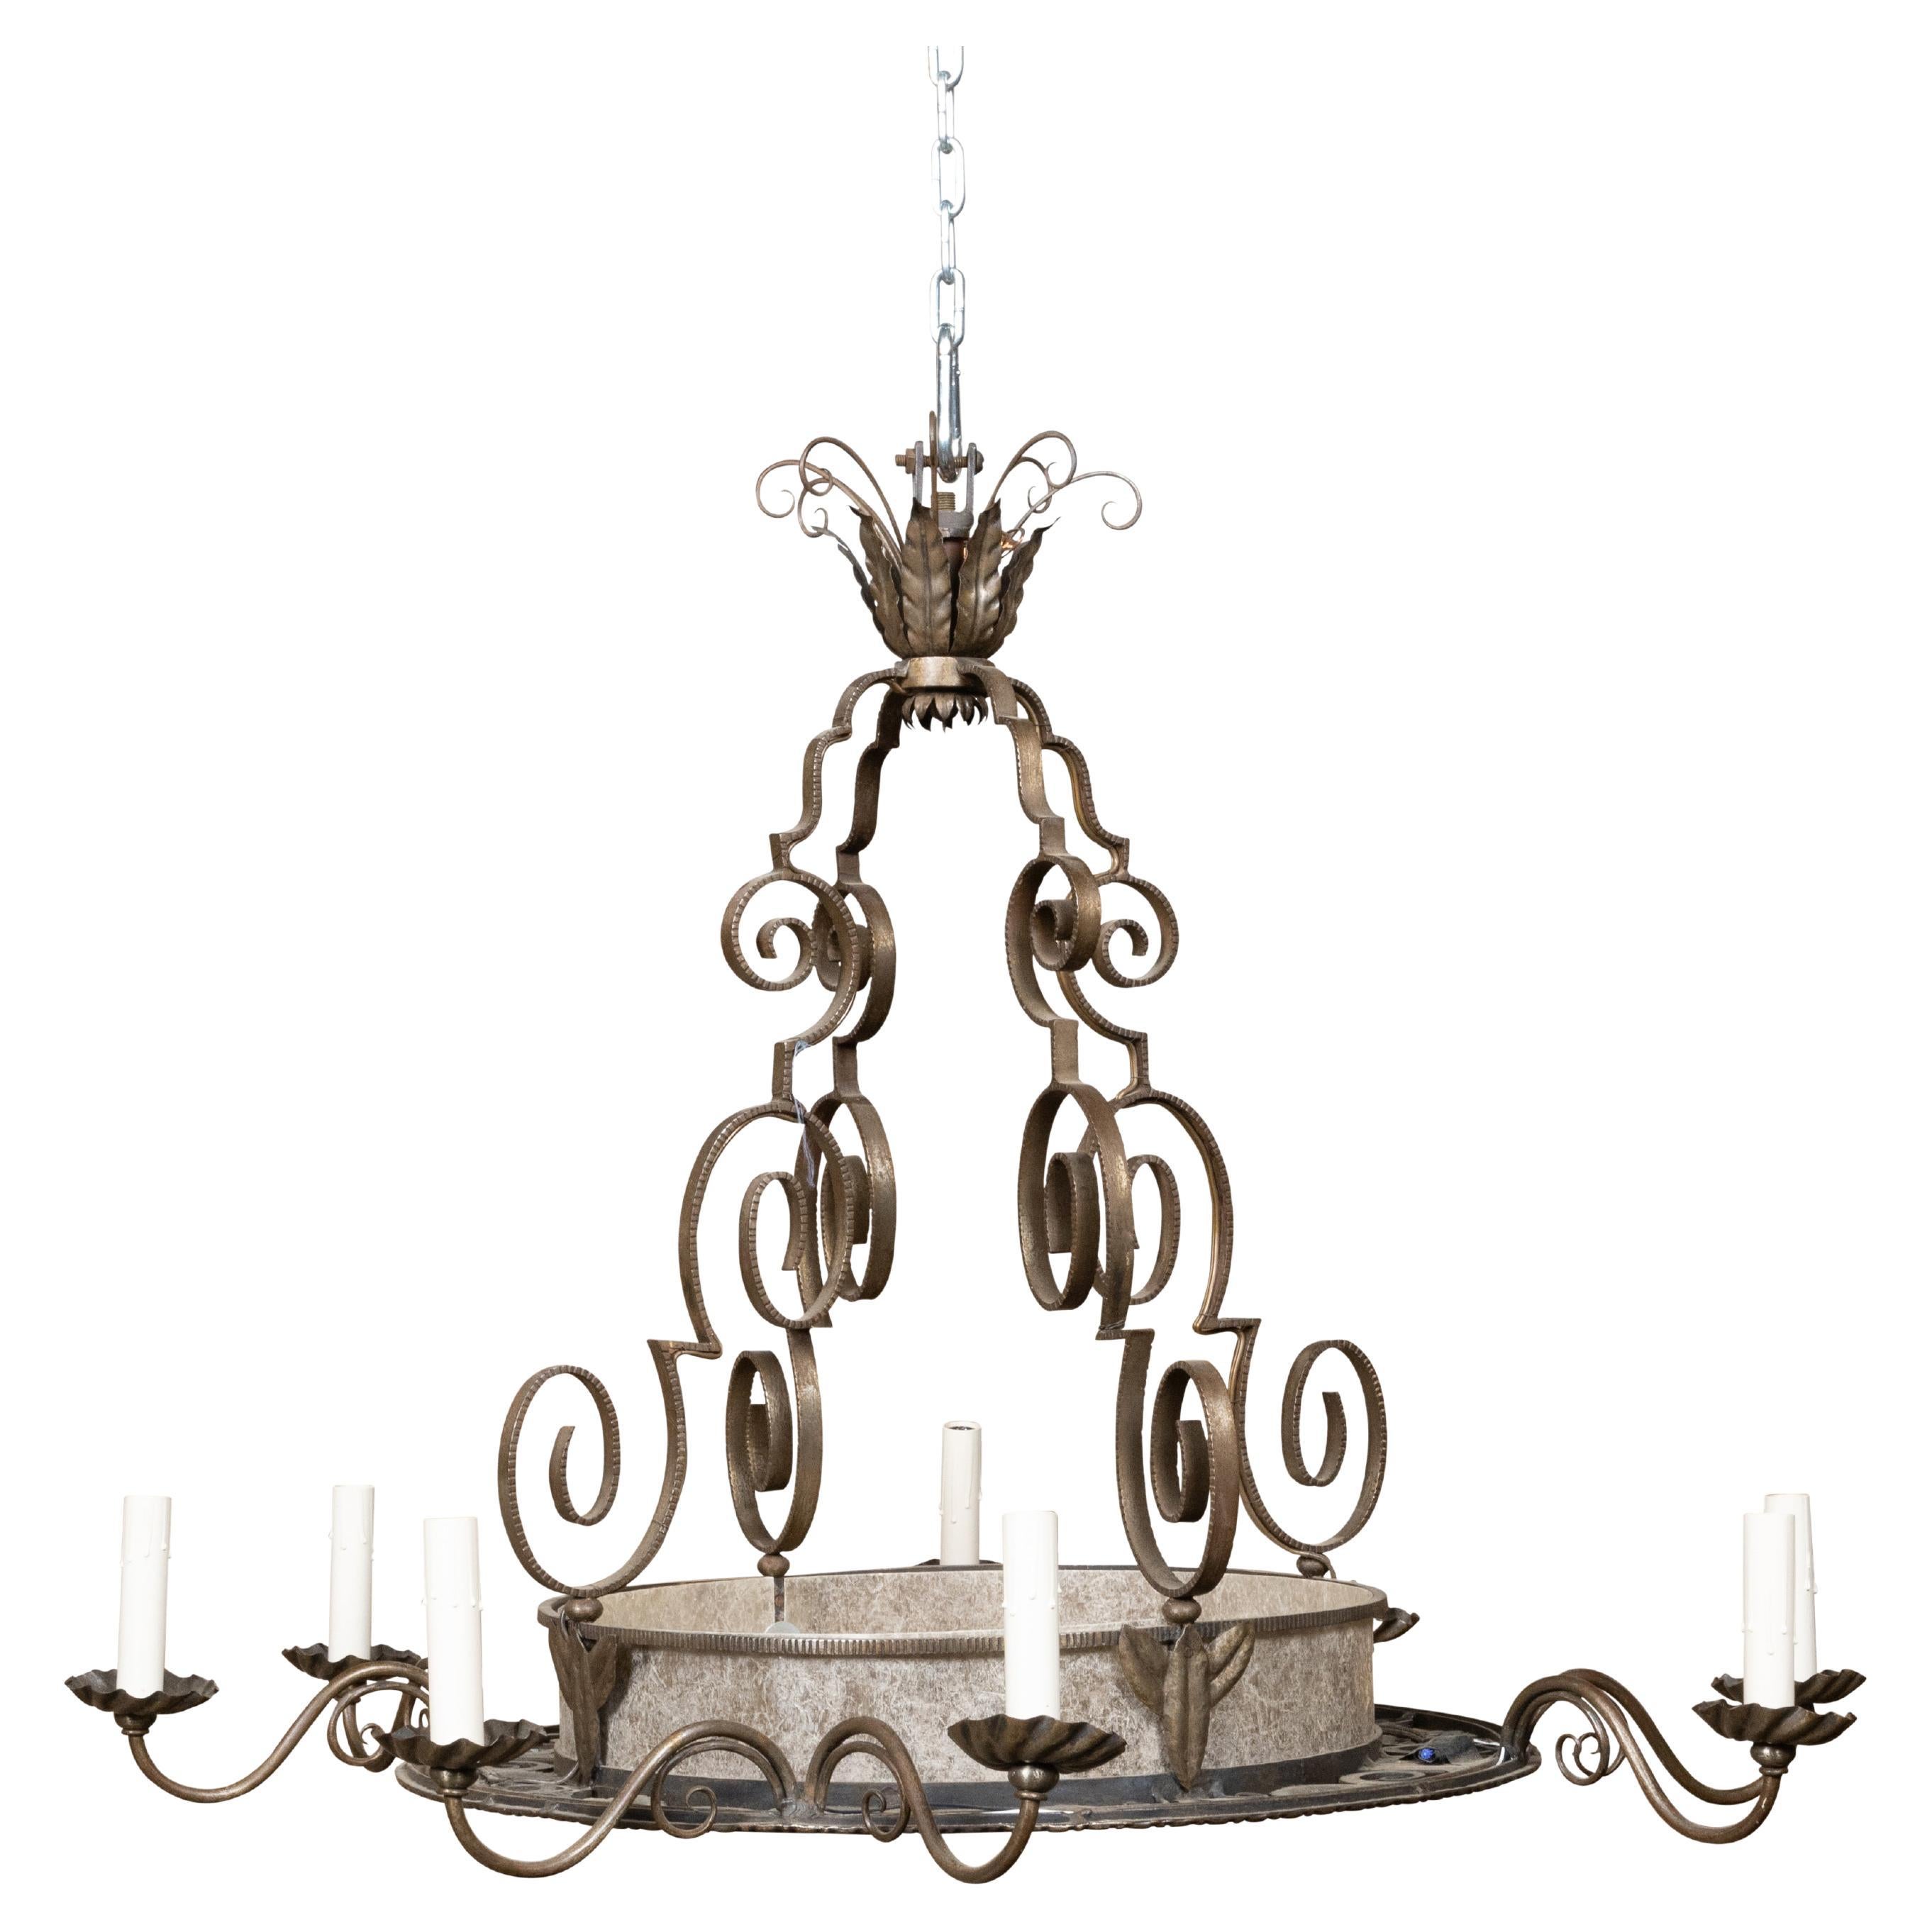 French Art Deco 1920s Iron Chandelier Eight Light Chandelier with Scrolling Arms For Sale